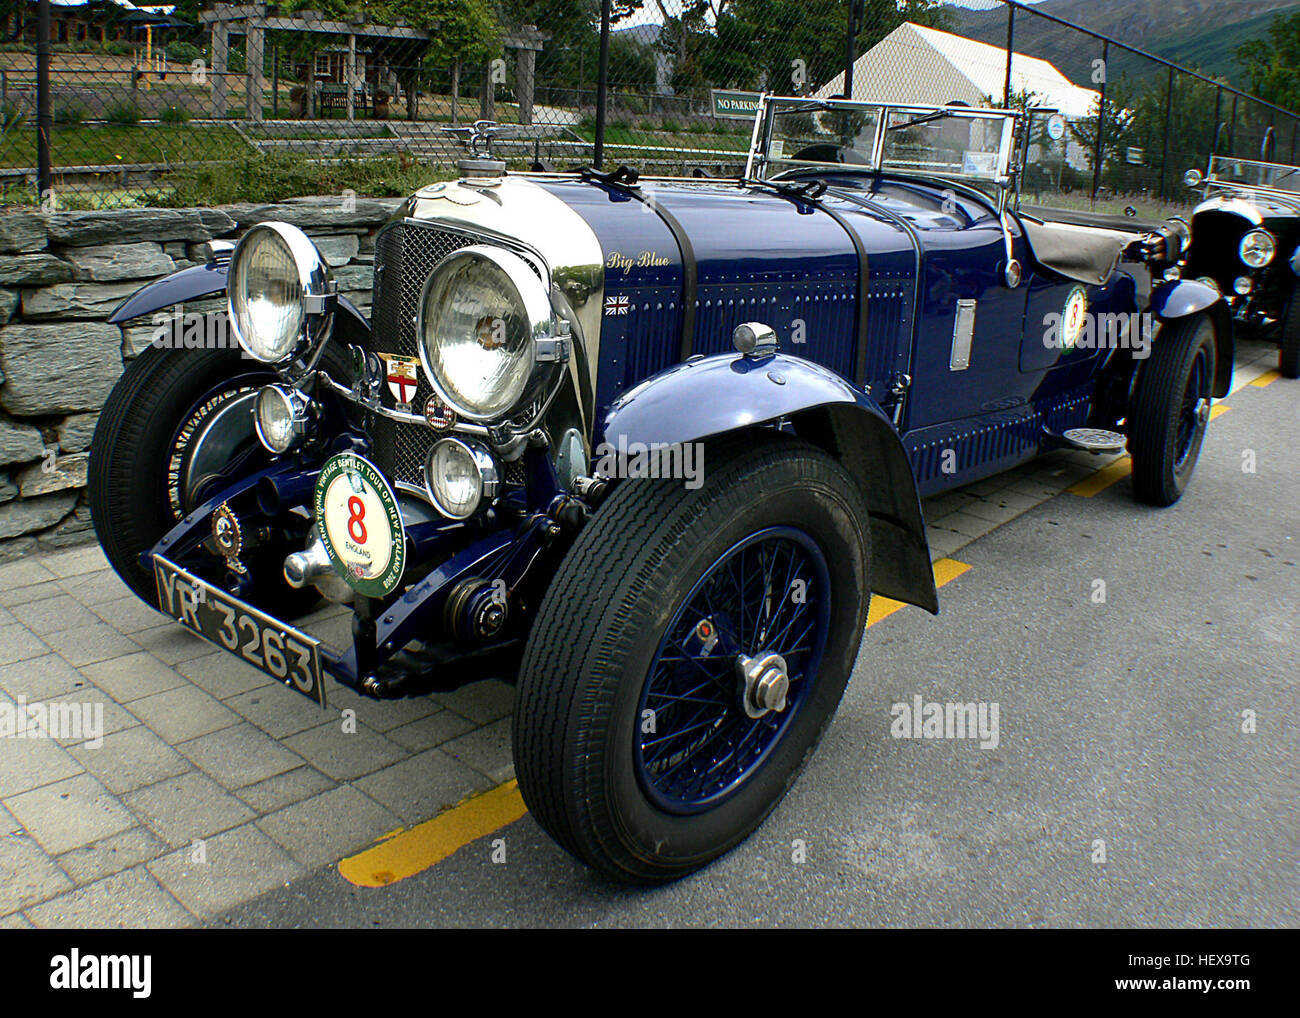 The regular Bentley 6½ Litre and the high-performance Bentley Speed Six were sports and luxury cars based on Bentley rolling chassis in production from 1926 to 1930. The Speed Six, introduced in 1928, would become the most-successful racing Bentley. Two Bentley Speed Six became known as the Blue Train Bentleys after their owner Woolf Barnato's involvement in the Blue Train Races of 1930. Stock Photo